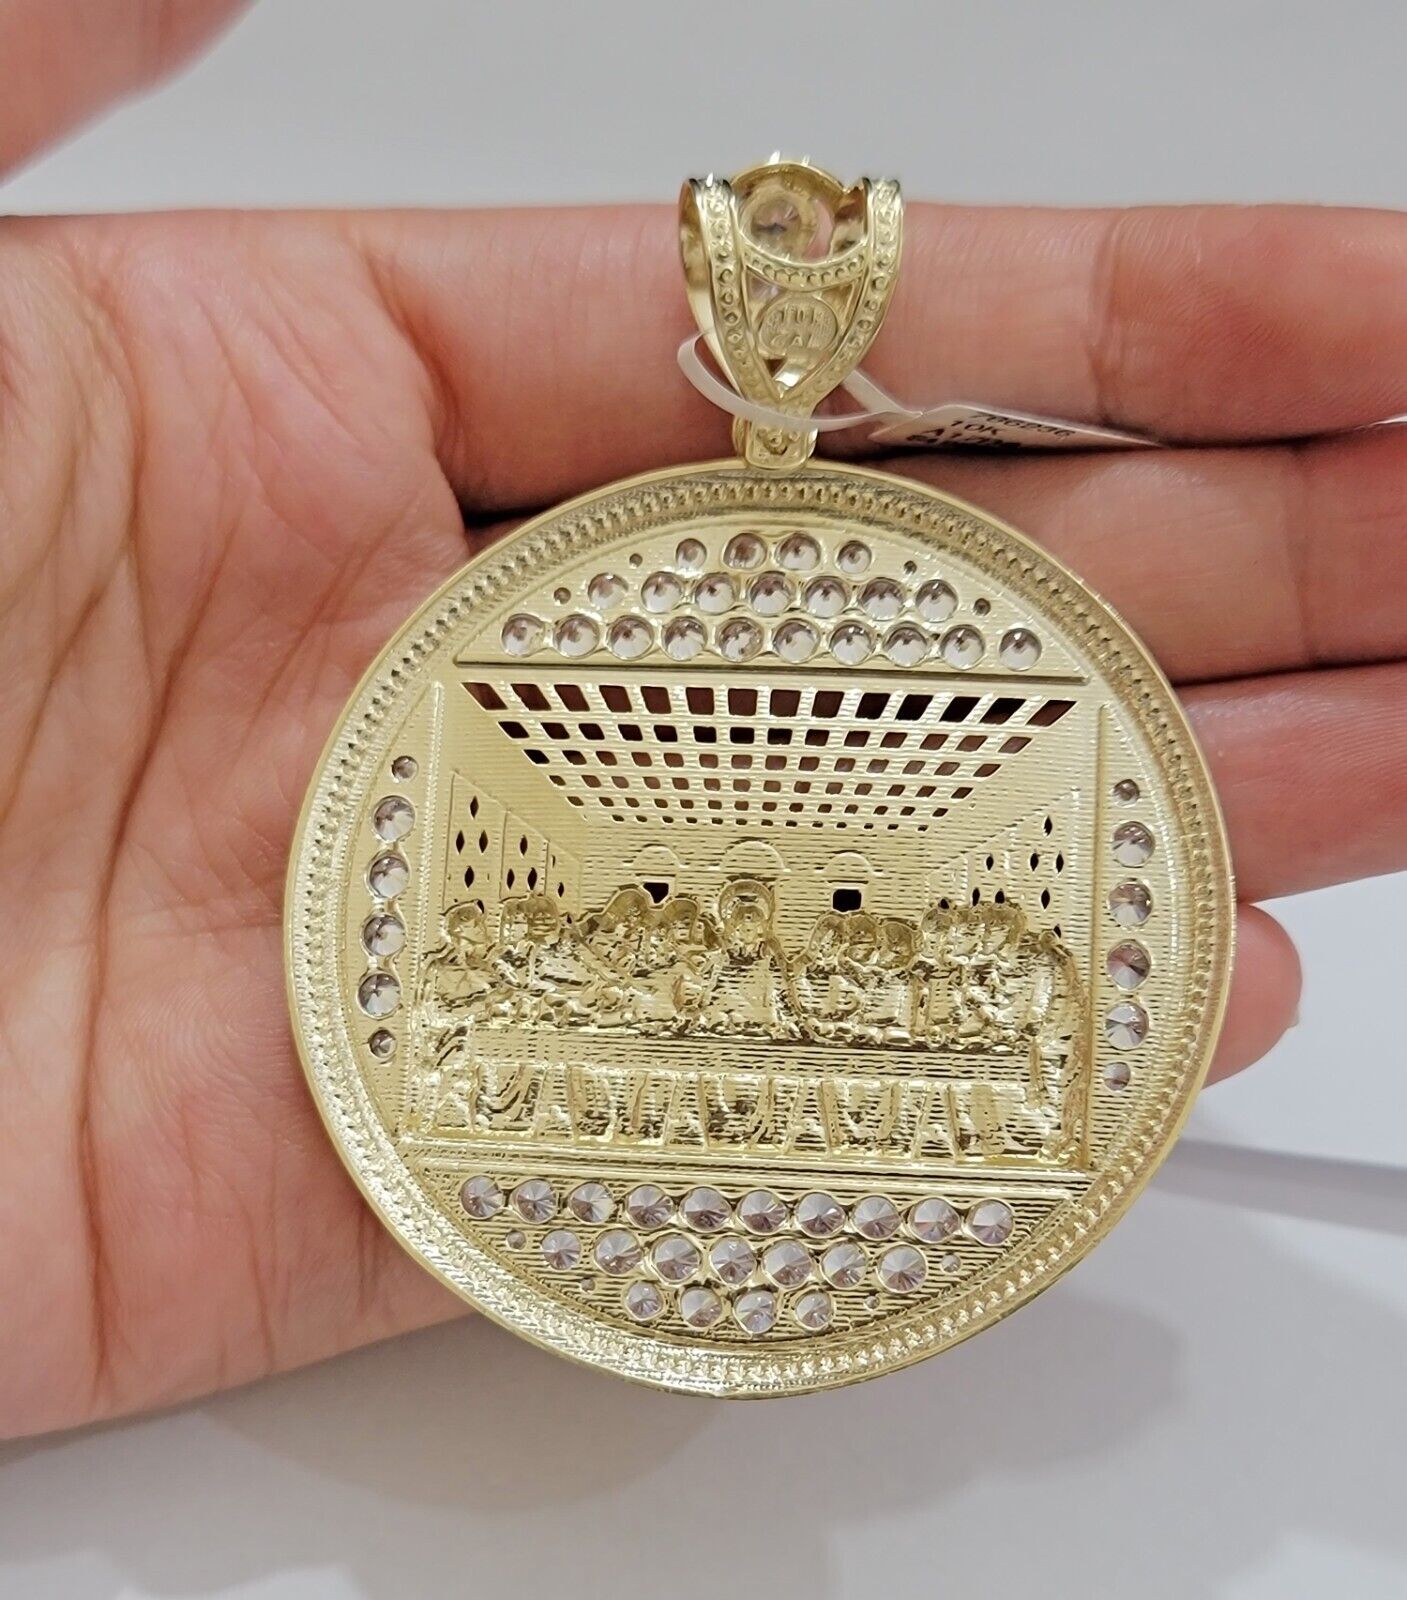 Real 10k Gold Pendant Charm Last Supper Jesus 10kt Yellow Gold With Stones , New